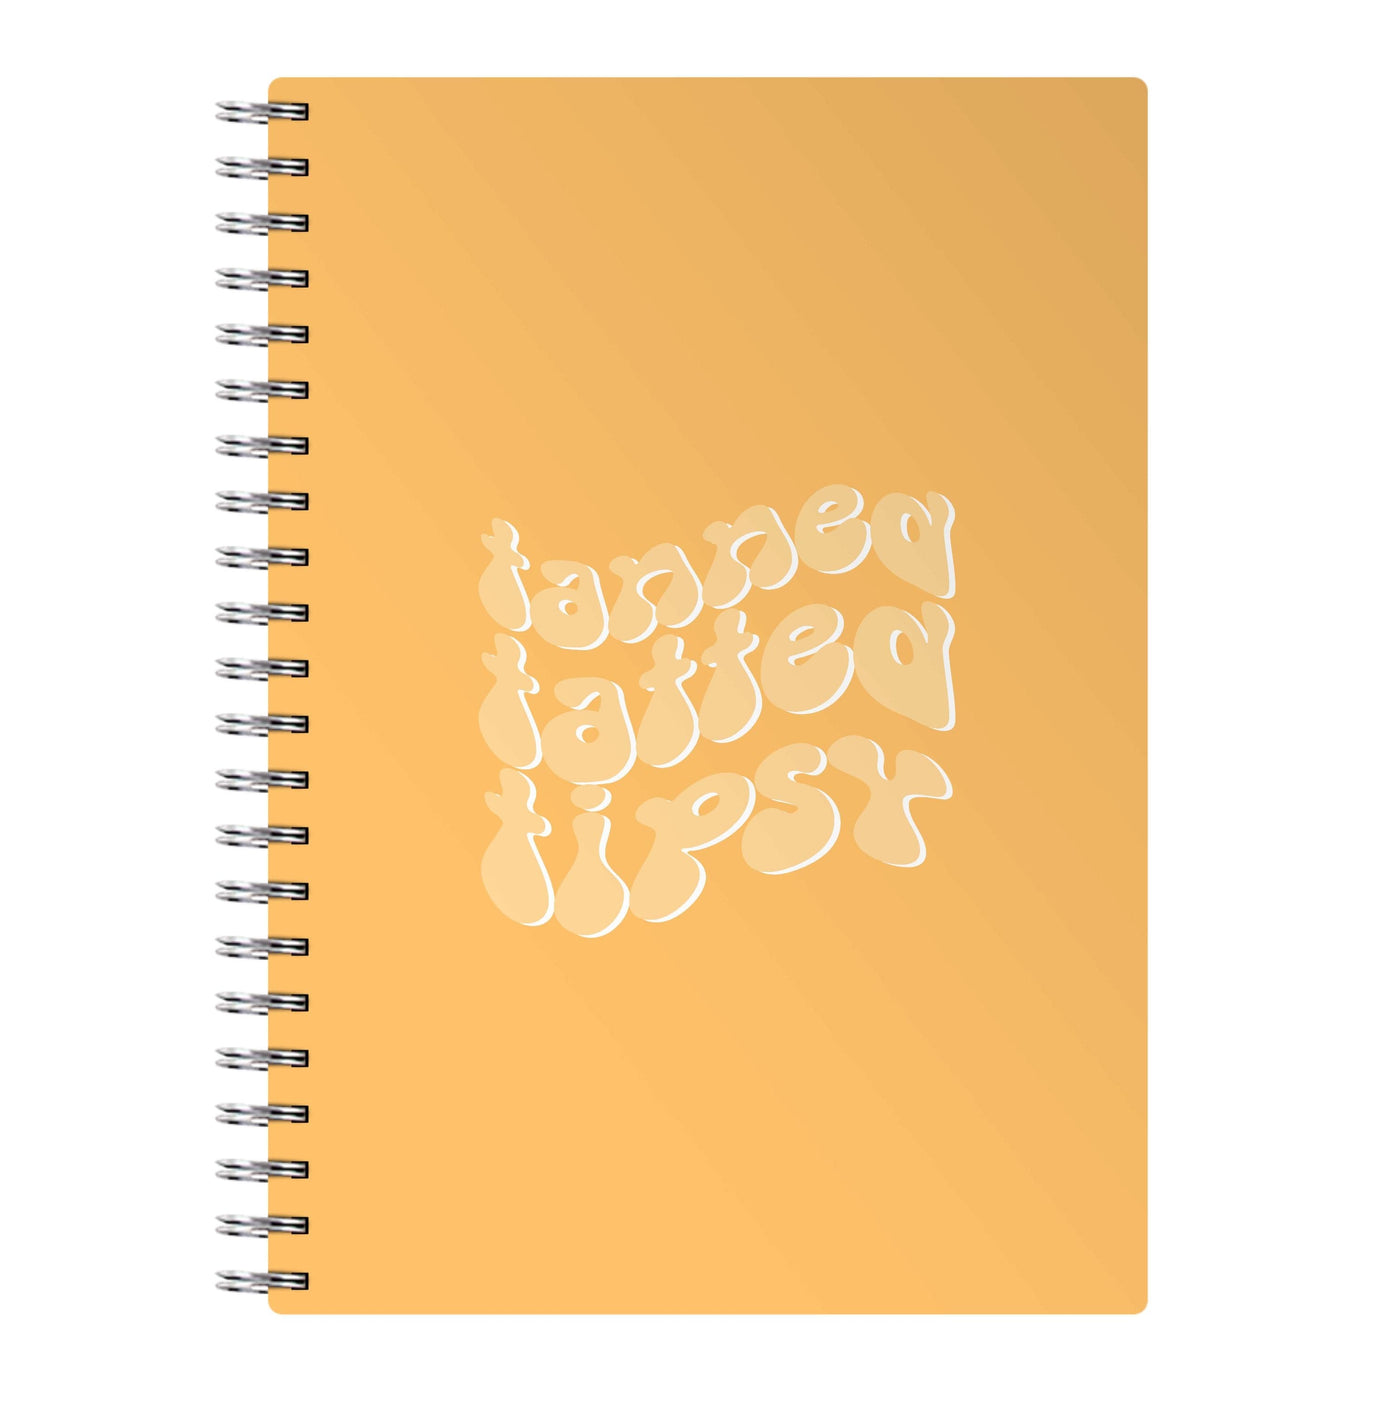 Tanned Tatted Tipsy - Summer Quotes Notebook